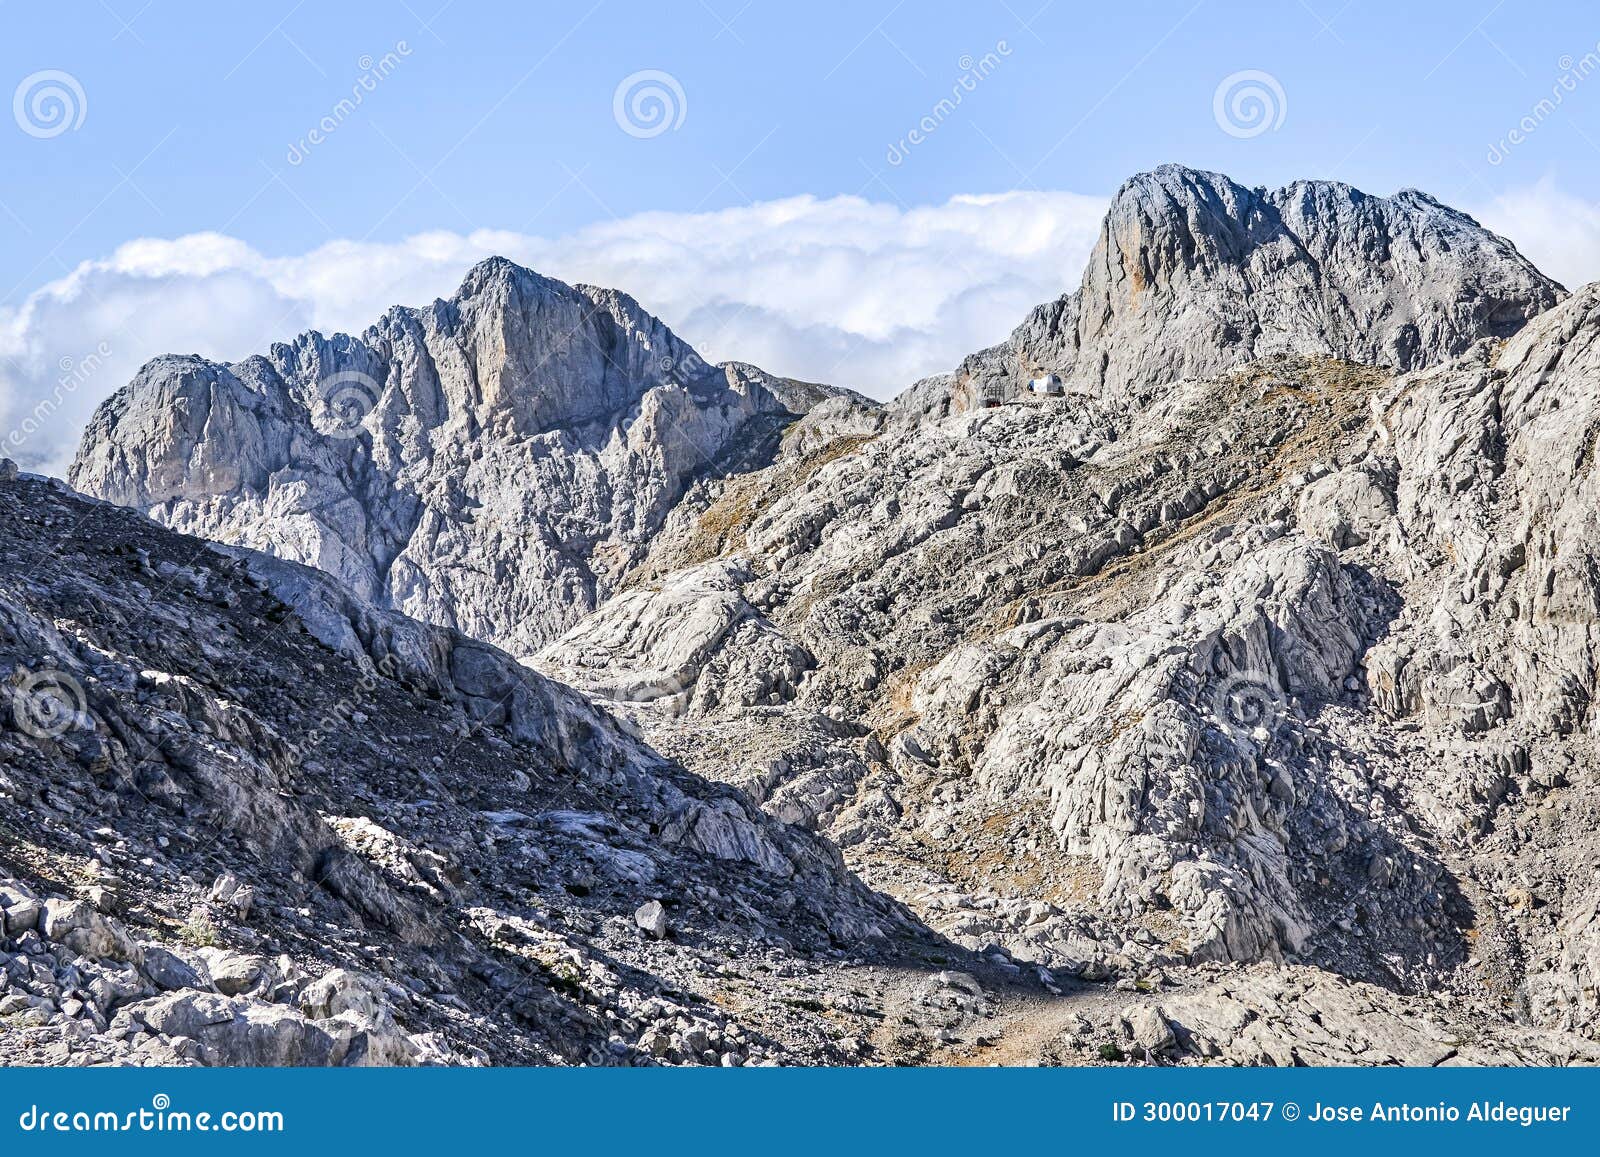 veronica refuge located in the central massif of the picos de europa national park, 2325 meters above sea level, in fuente de,